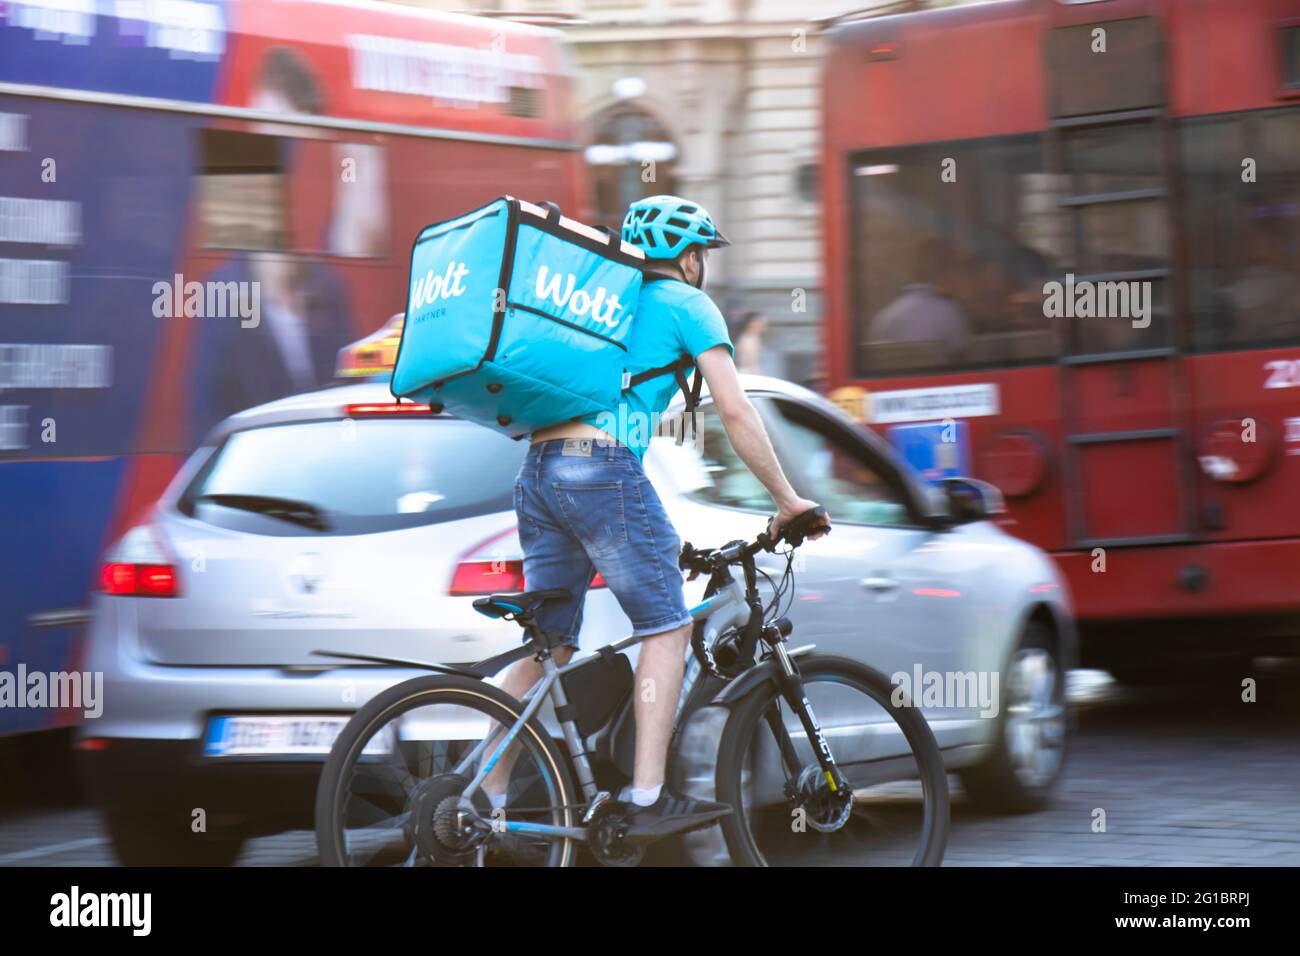 Belgrade, Serbia - June 5, 2021: Wolt food delivery service courier riding a bike in busy city street traffic Stock Photo